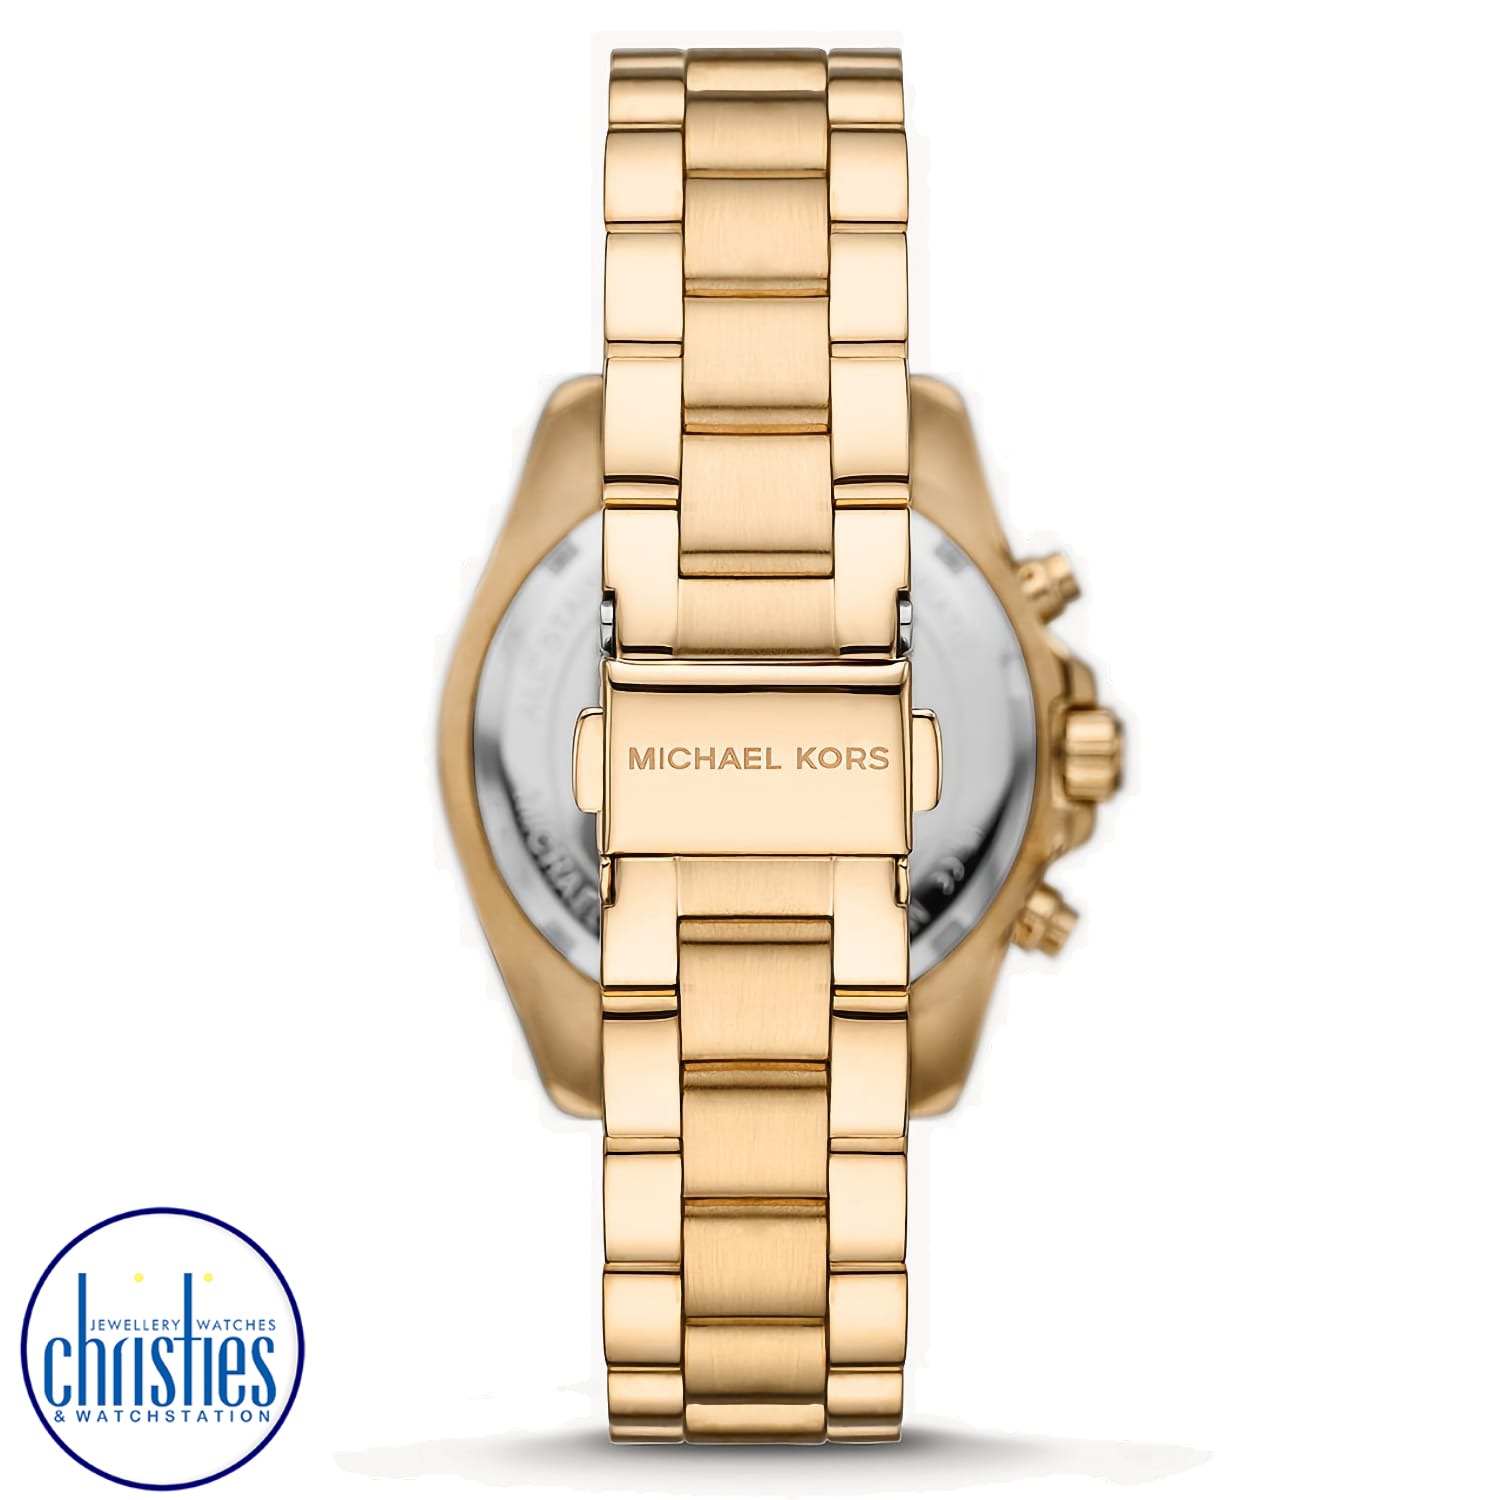 MK7257 Michael Kors Bradshaw Chronograph Gold-Tone Watch. MK7257 Michael Kors Bradshaw Chronograph Gold-Tone Stainless Steel WatchAfterpay - Split your purchase into 4 instalments - Pay for your purchase over 4 instalments, due every two weeks.